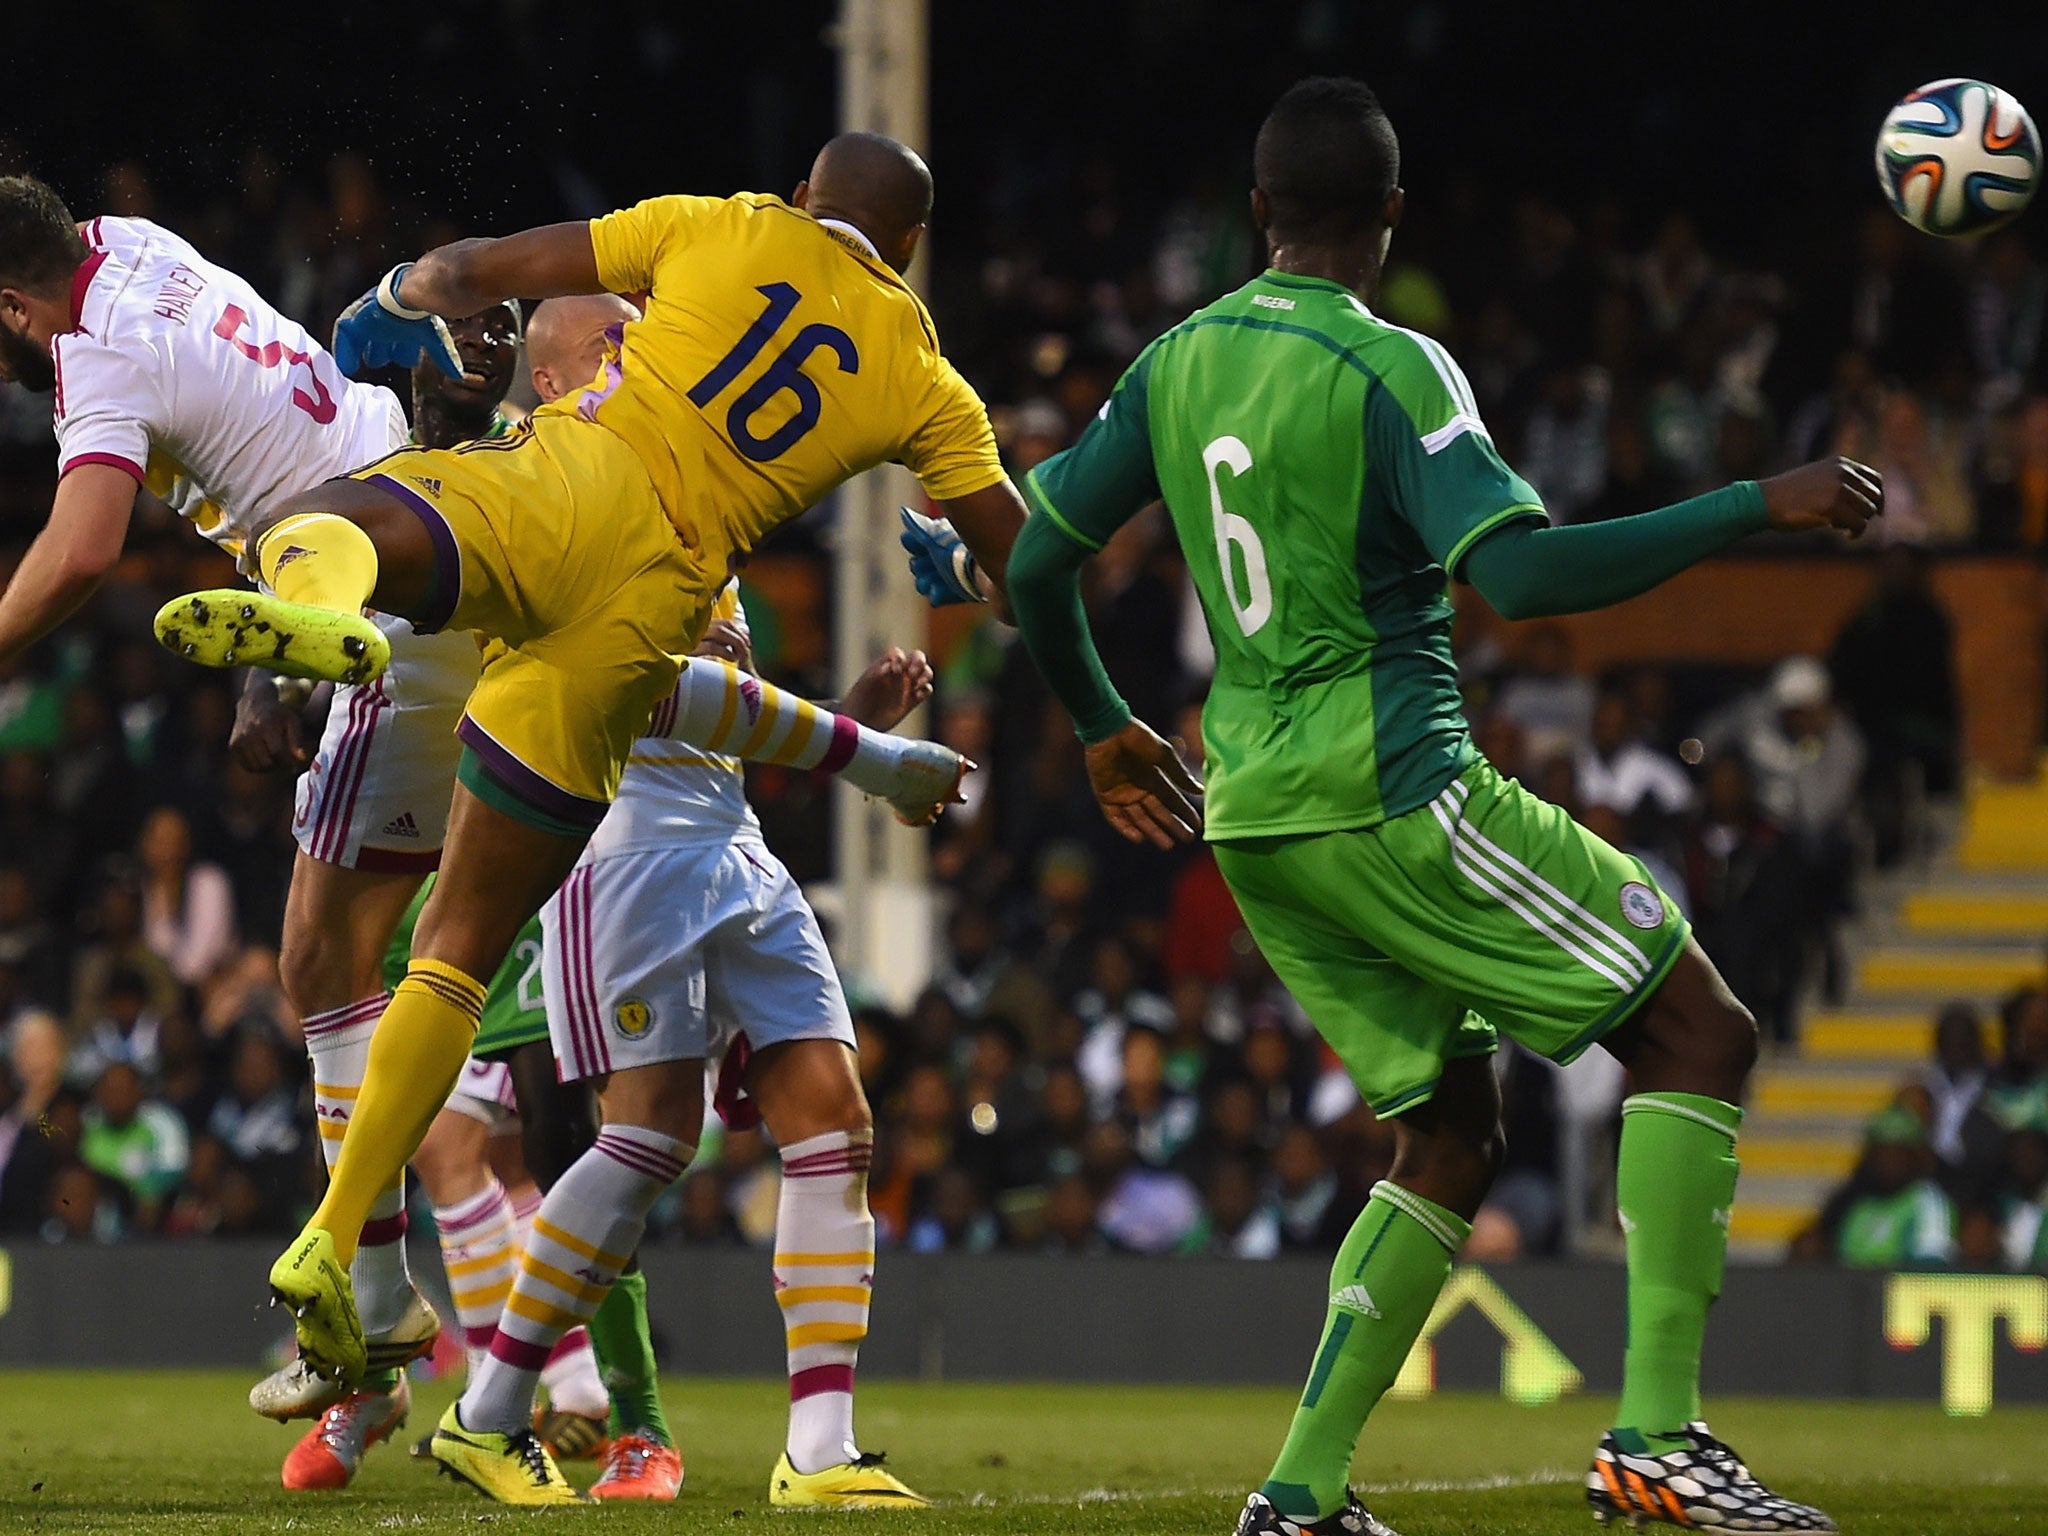 Nigeria goalkeeper Austine Ejide (#16) scoops the ball into his own net while competing with Scotland's Grant Hanley (#5)